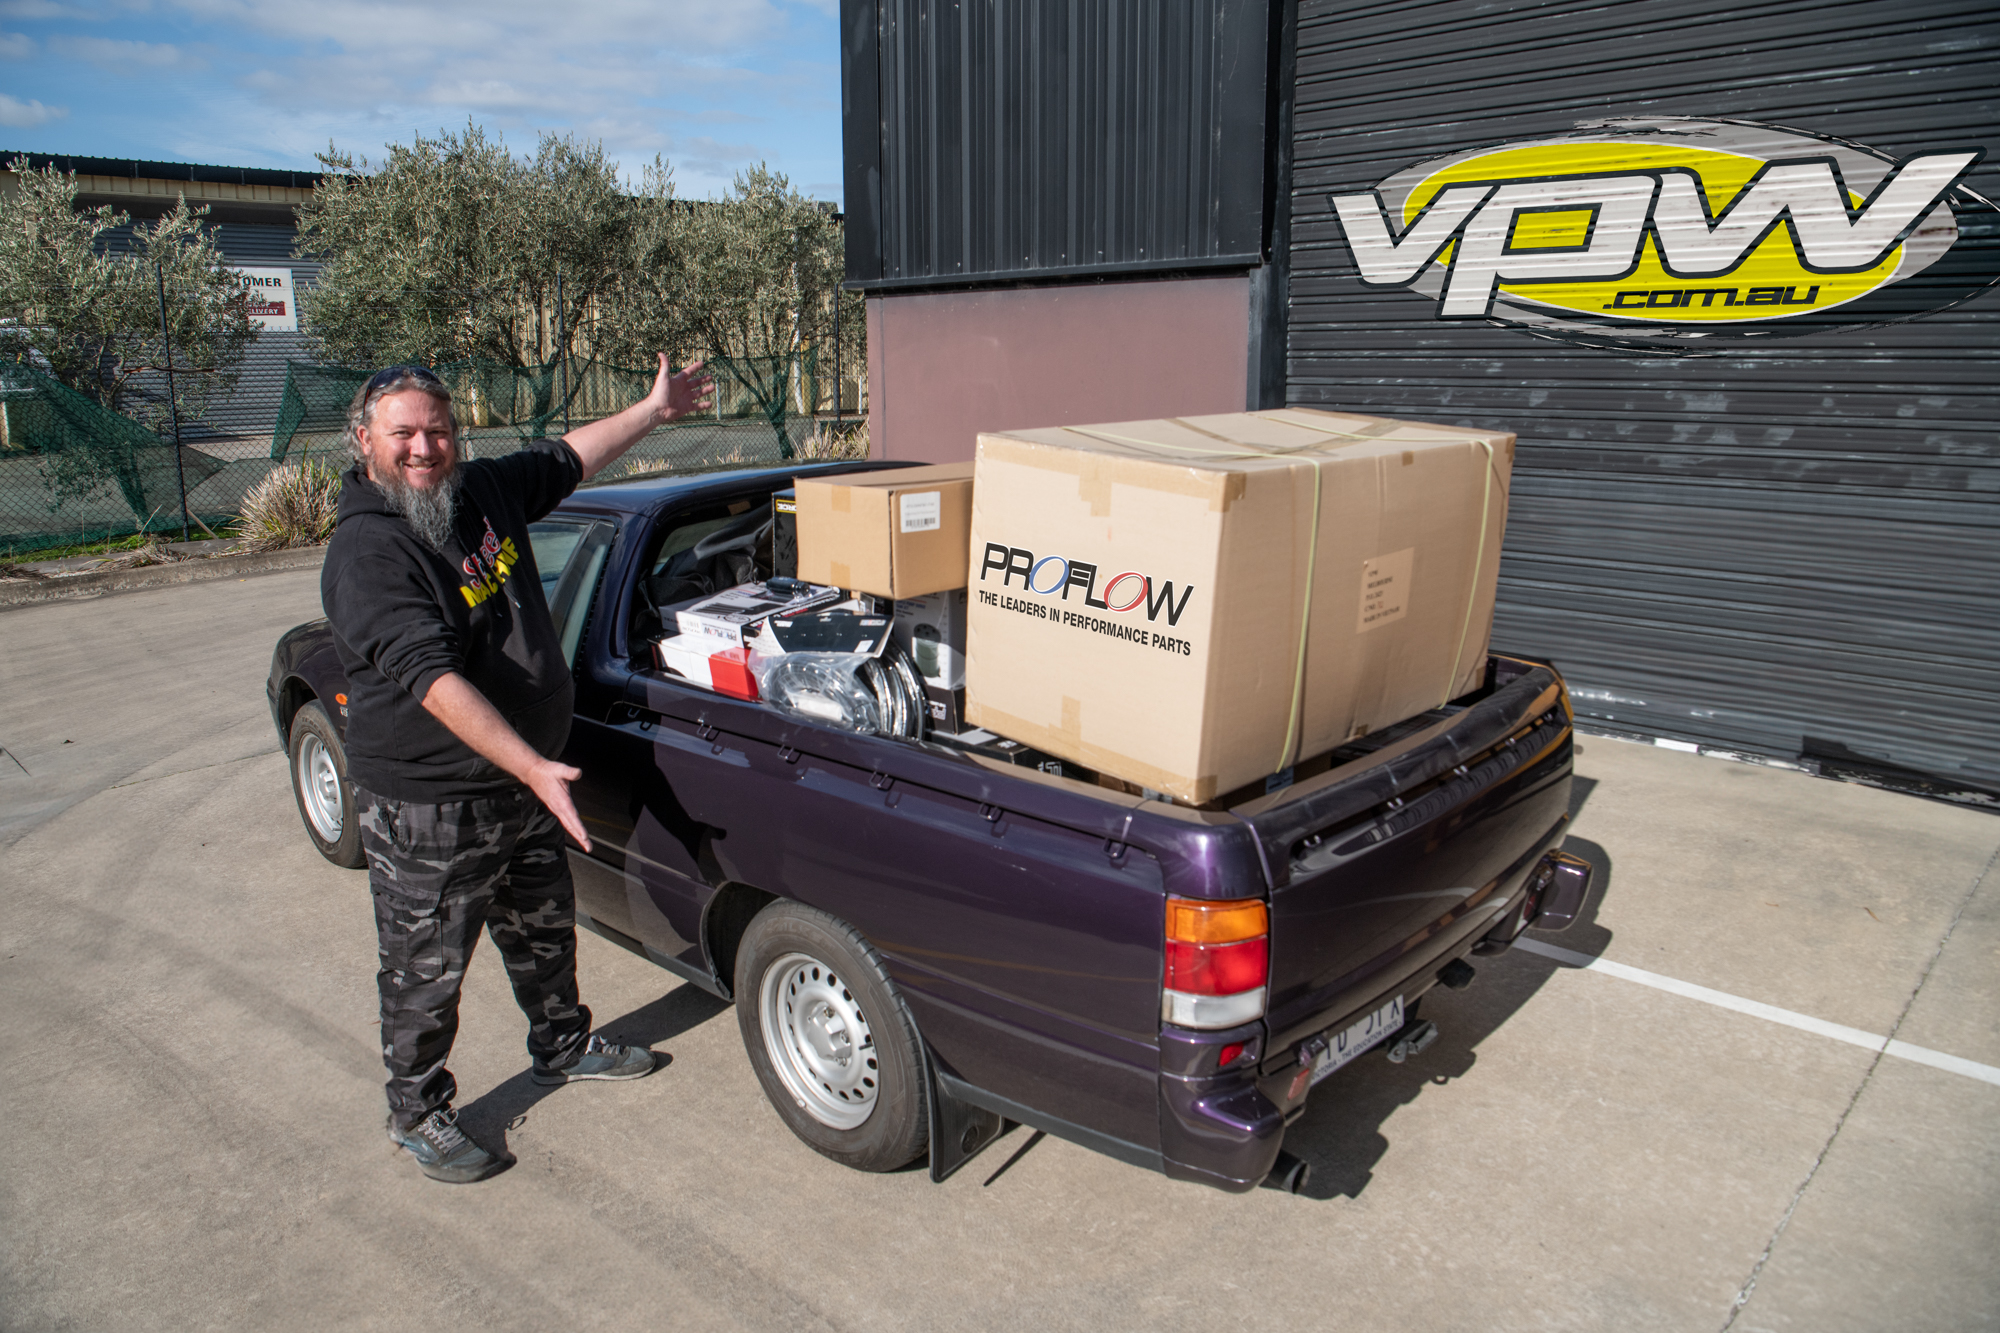 Video: Picking up all the parts we need for our VS ute!